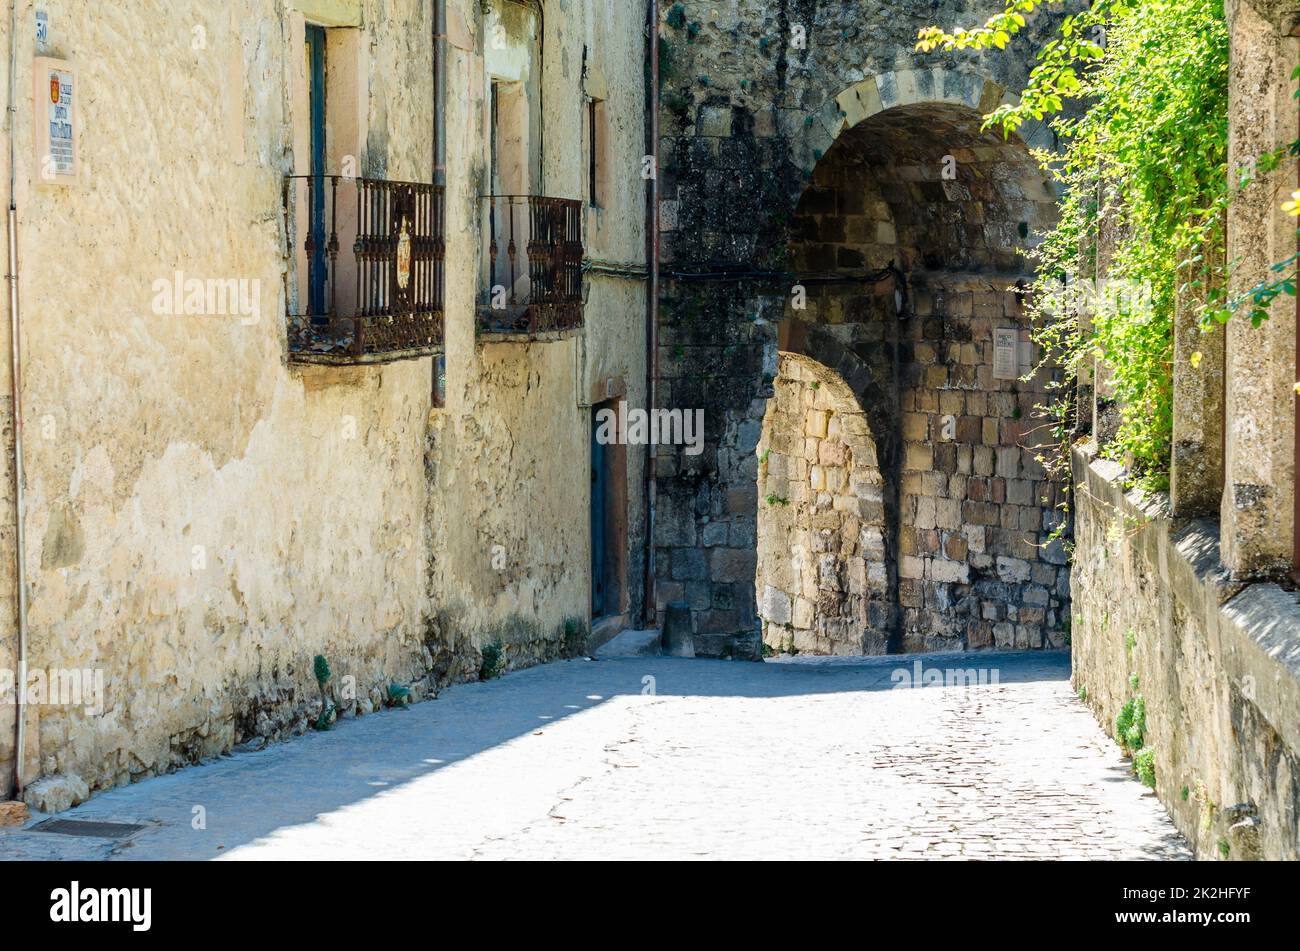 Architecture in the medieval village of Sepulveda, Castile and Leon, Spain Stock Photo